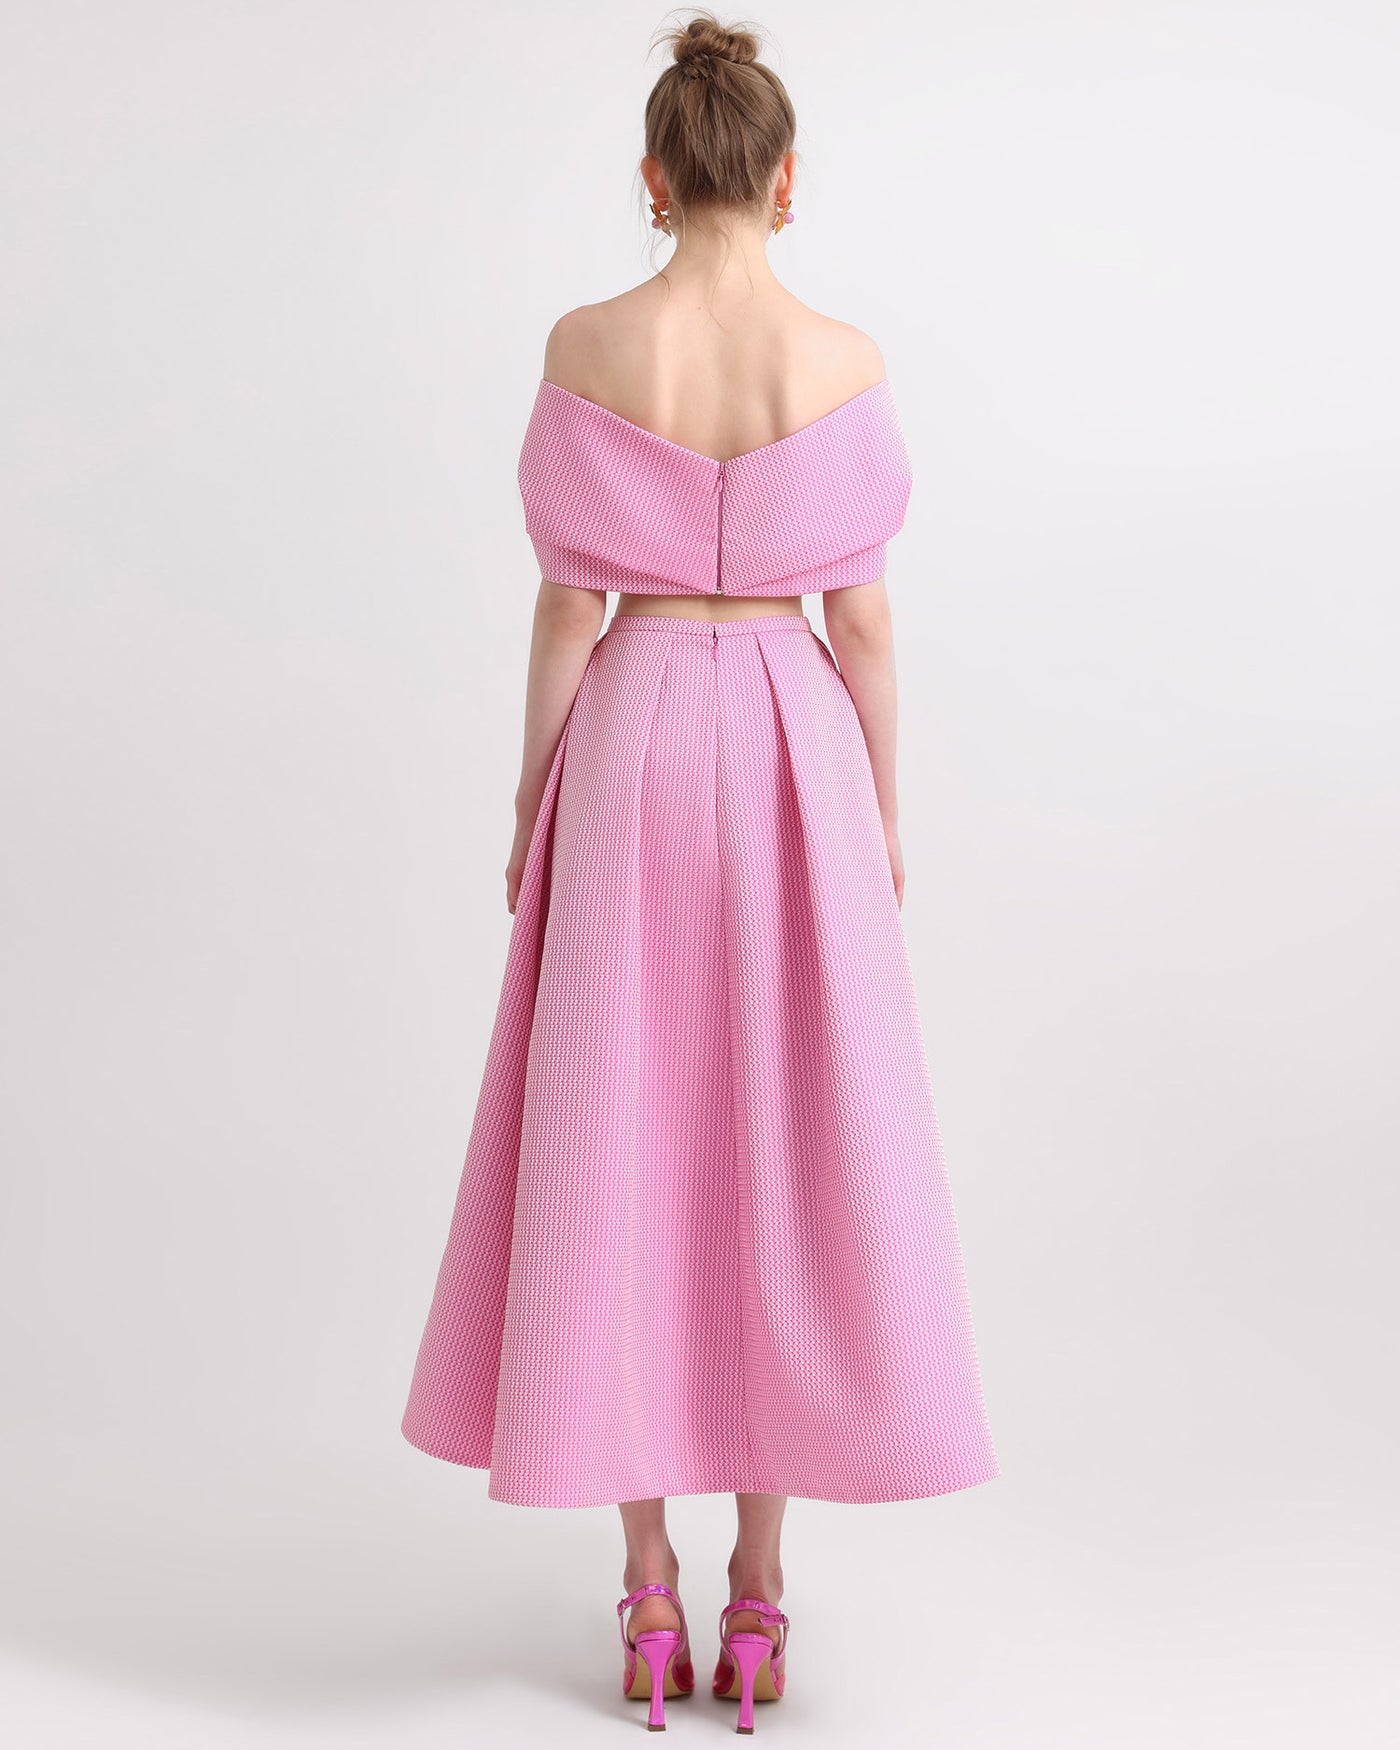 Off-Shoulder Dress with Draping